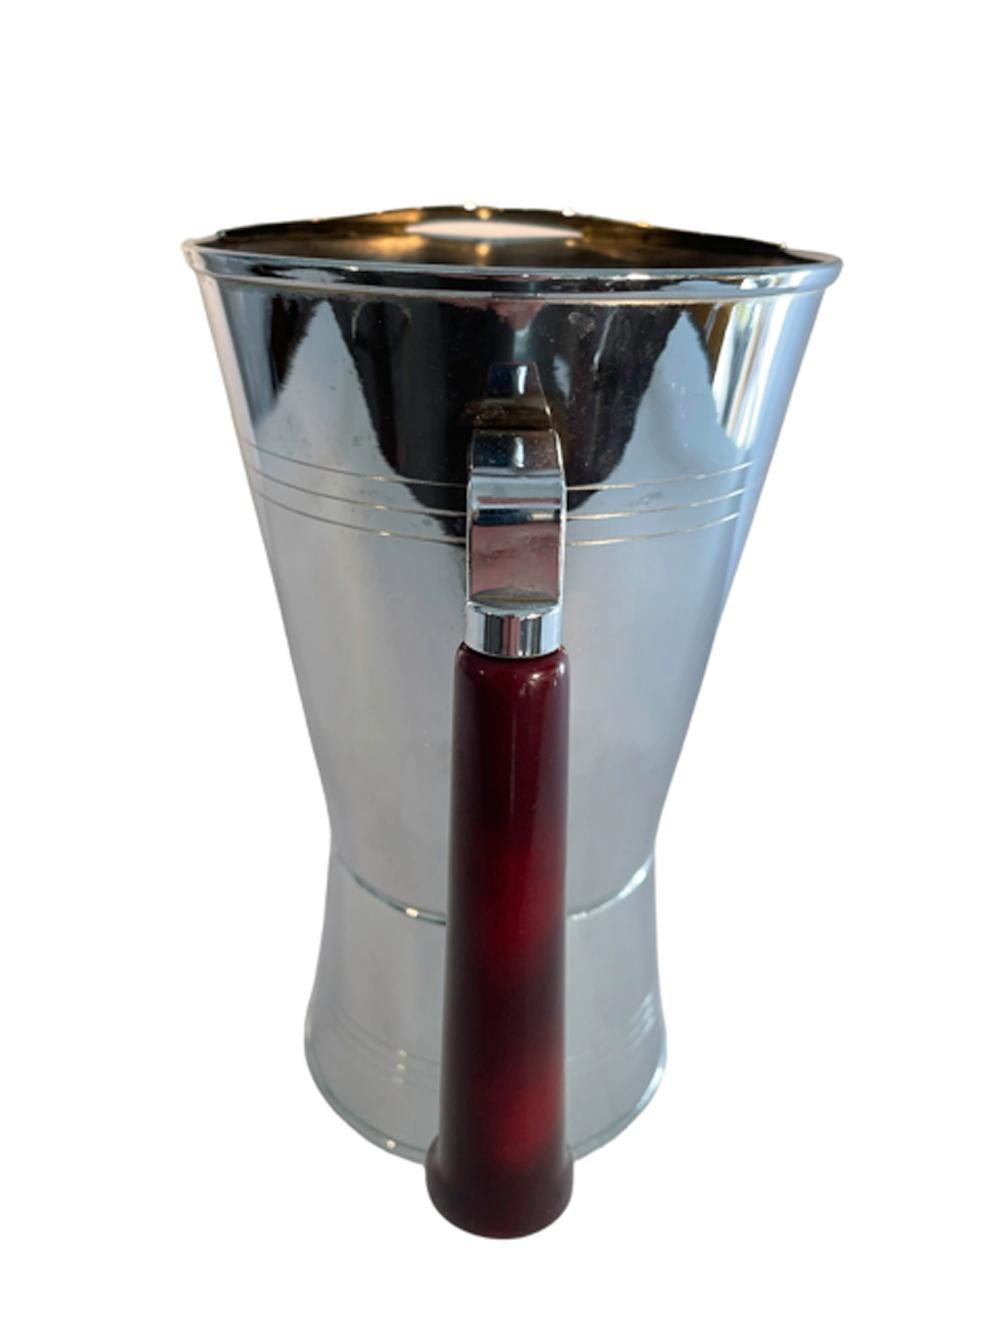 Chrome bar pitcher by Glo-Hill with red faux tortoiseshell Bakelite pistol grip handle. The pitcher with ice guard tapers from top to about a third from the bottom then flares out to the bottom.